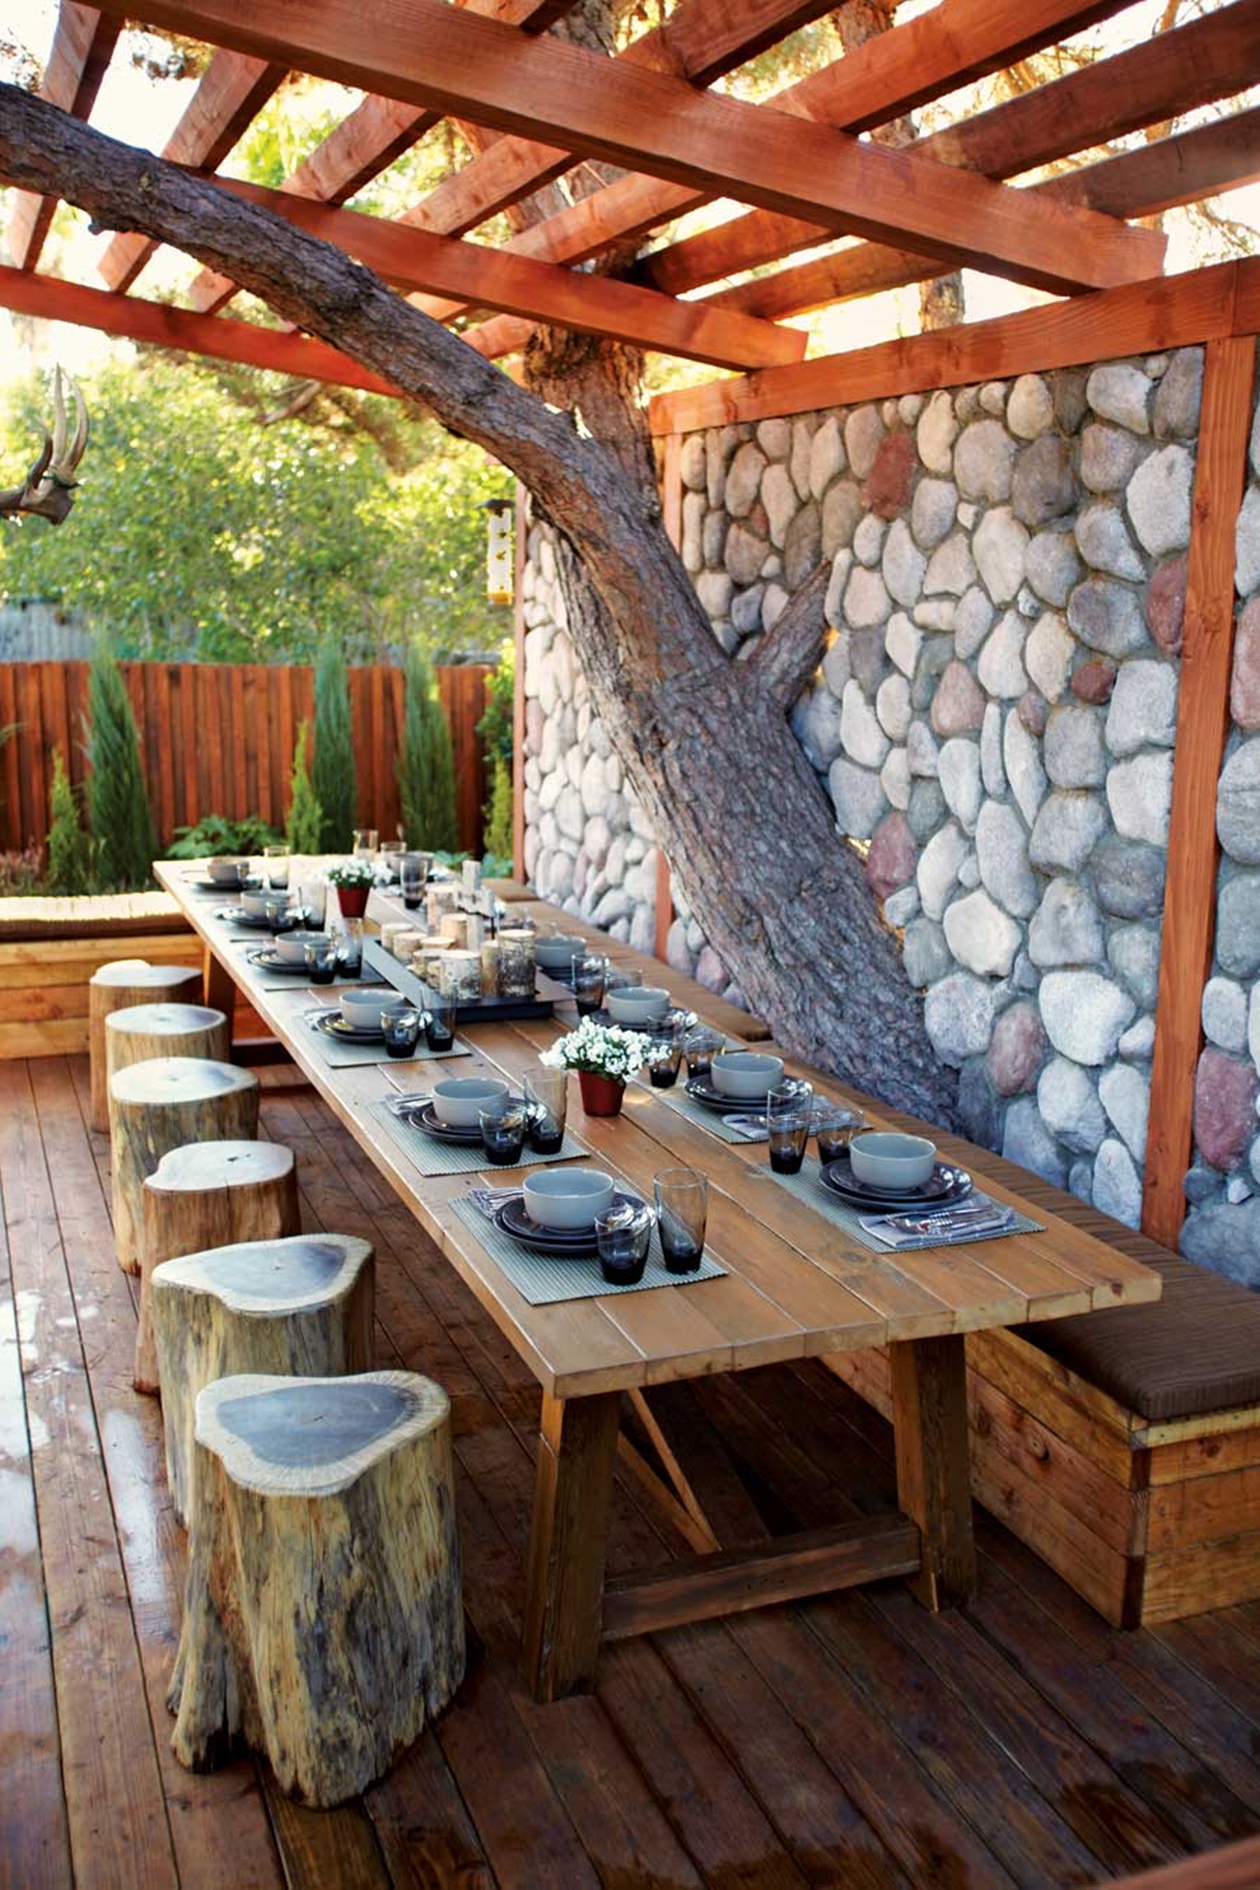 tree stump chairs in gorgeous must see outdoor dining areas | lovelyspaces.com